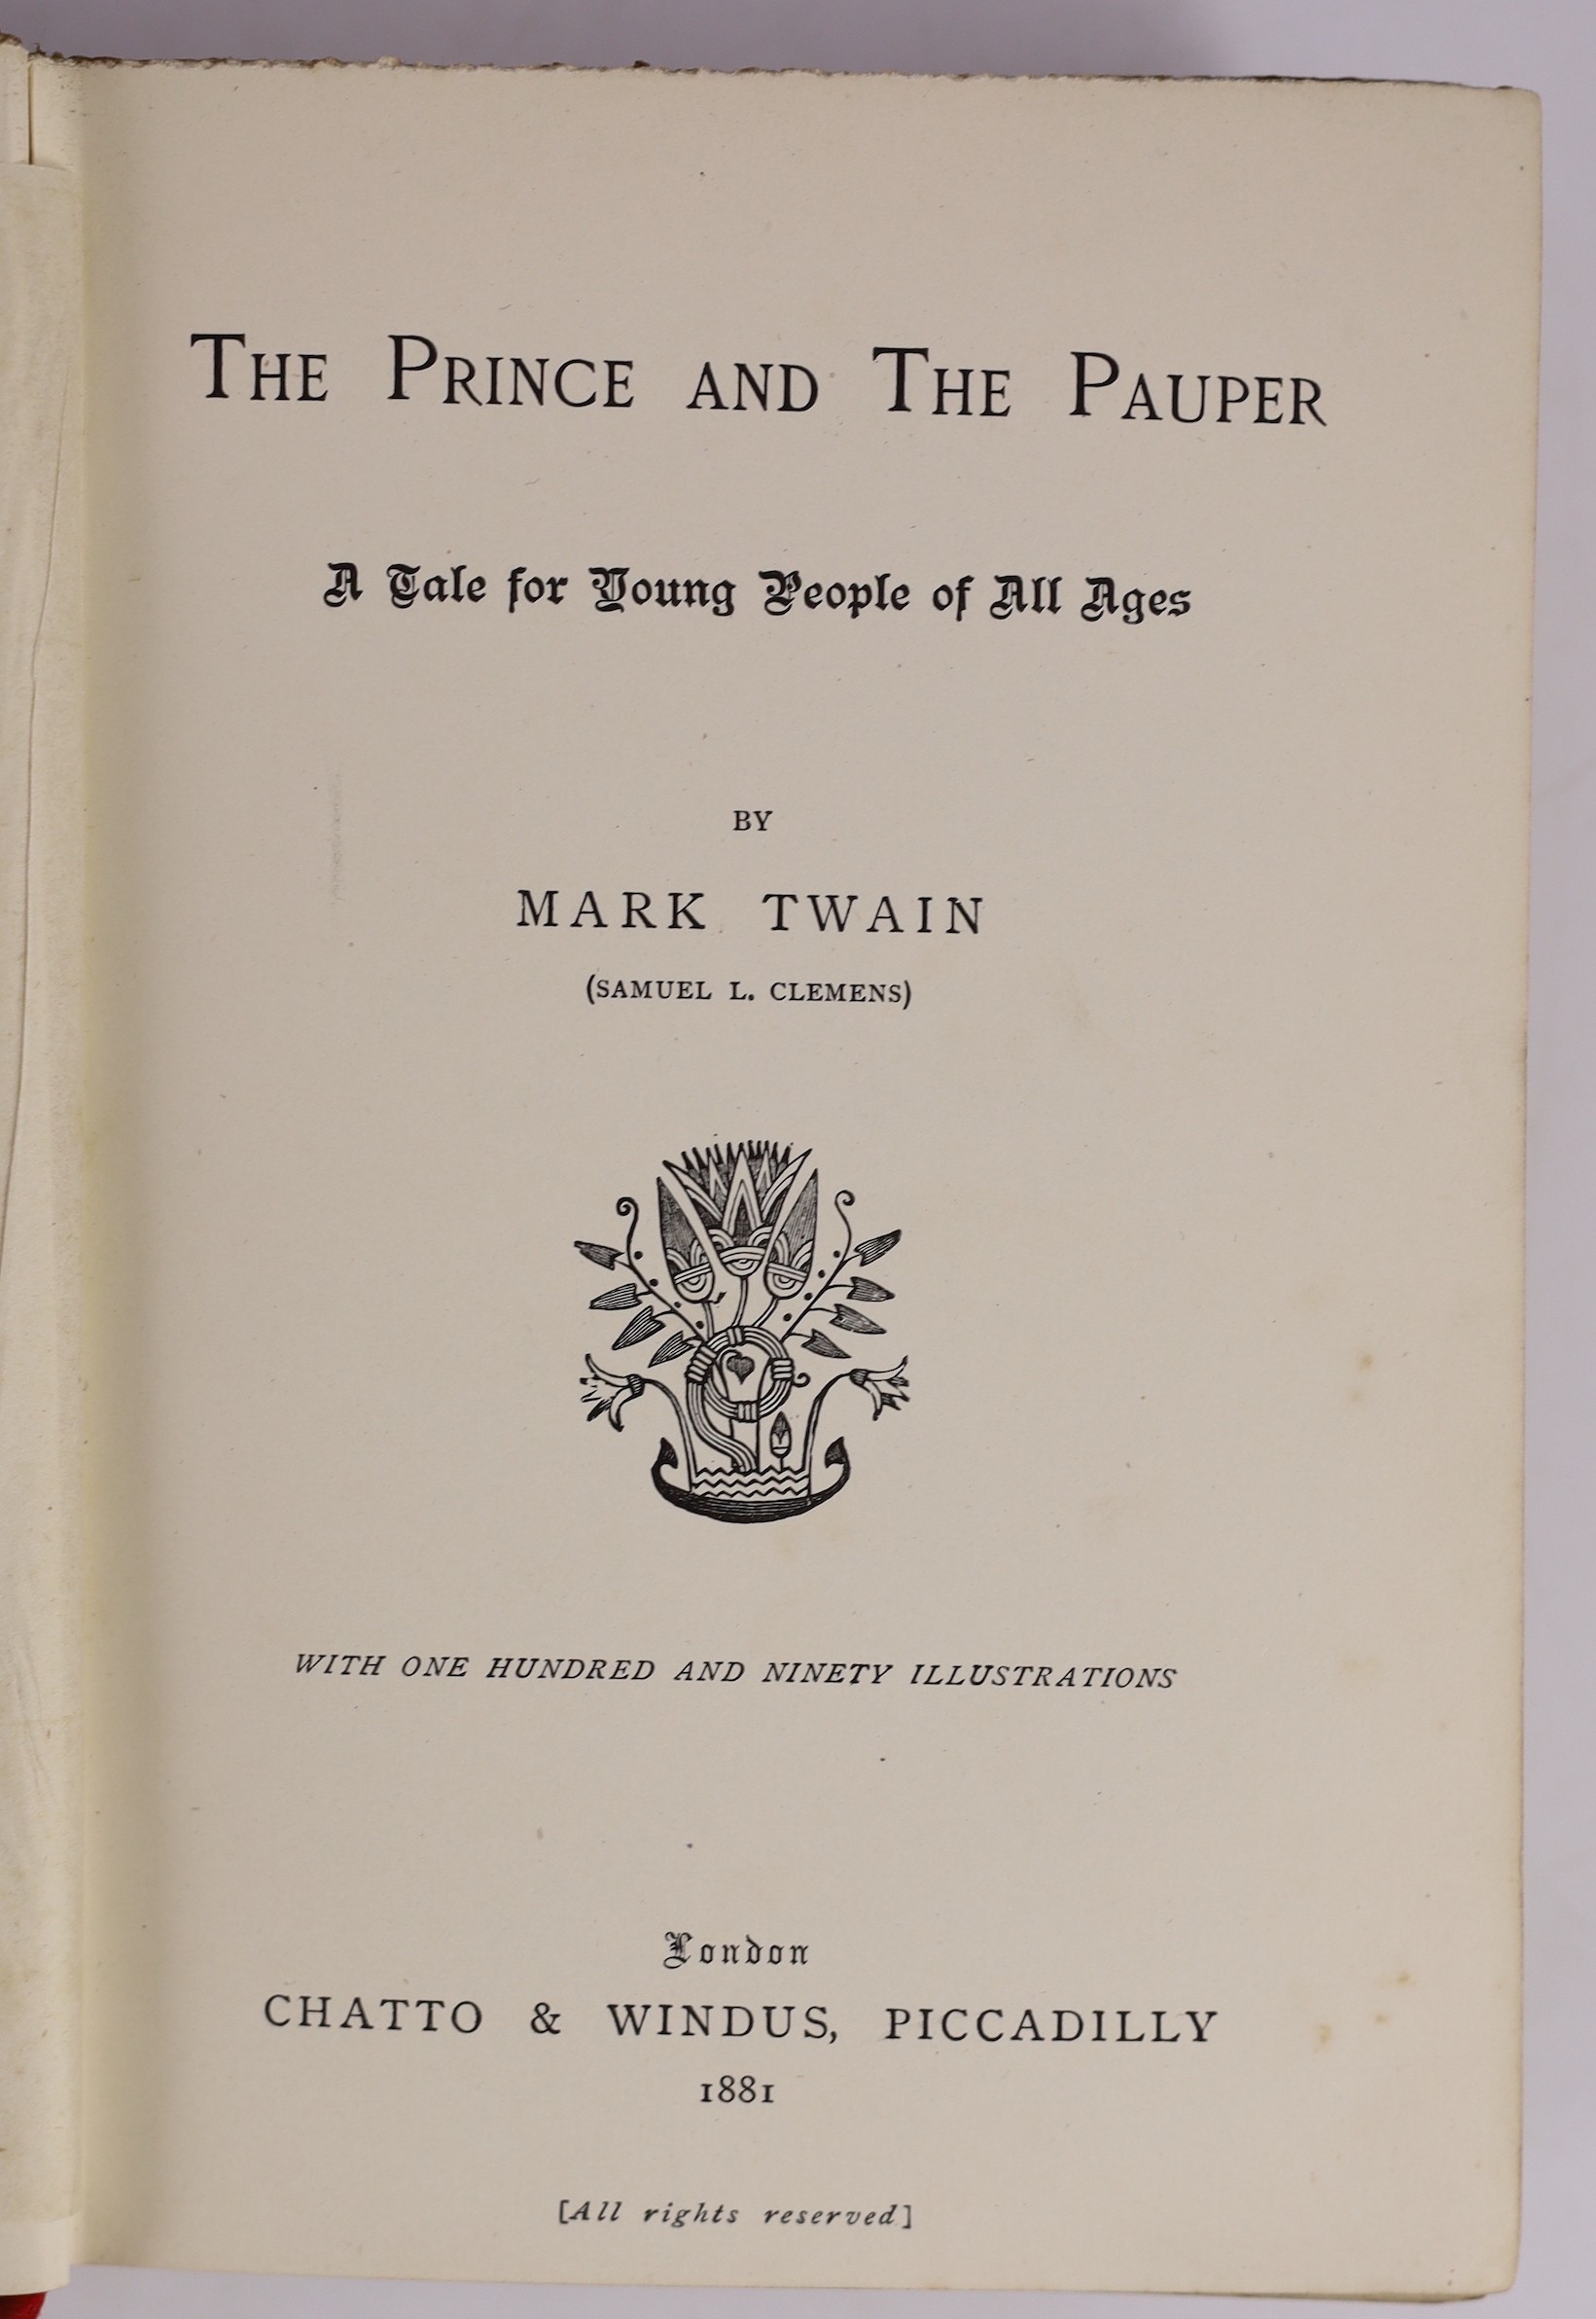 Twain, Mark [Clemens, S.L] - 3 works - The Prince and the Pauper. A Tale for Young People of all Ages, 1st edition, 8vo, original cloth, advertisements at end dated November, 1881, Chatto & Windus, London 1881; A Tramp A